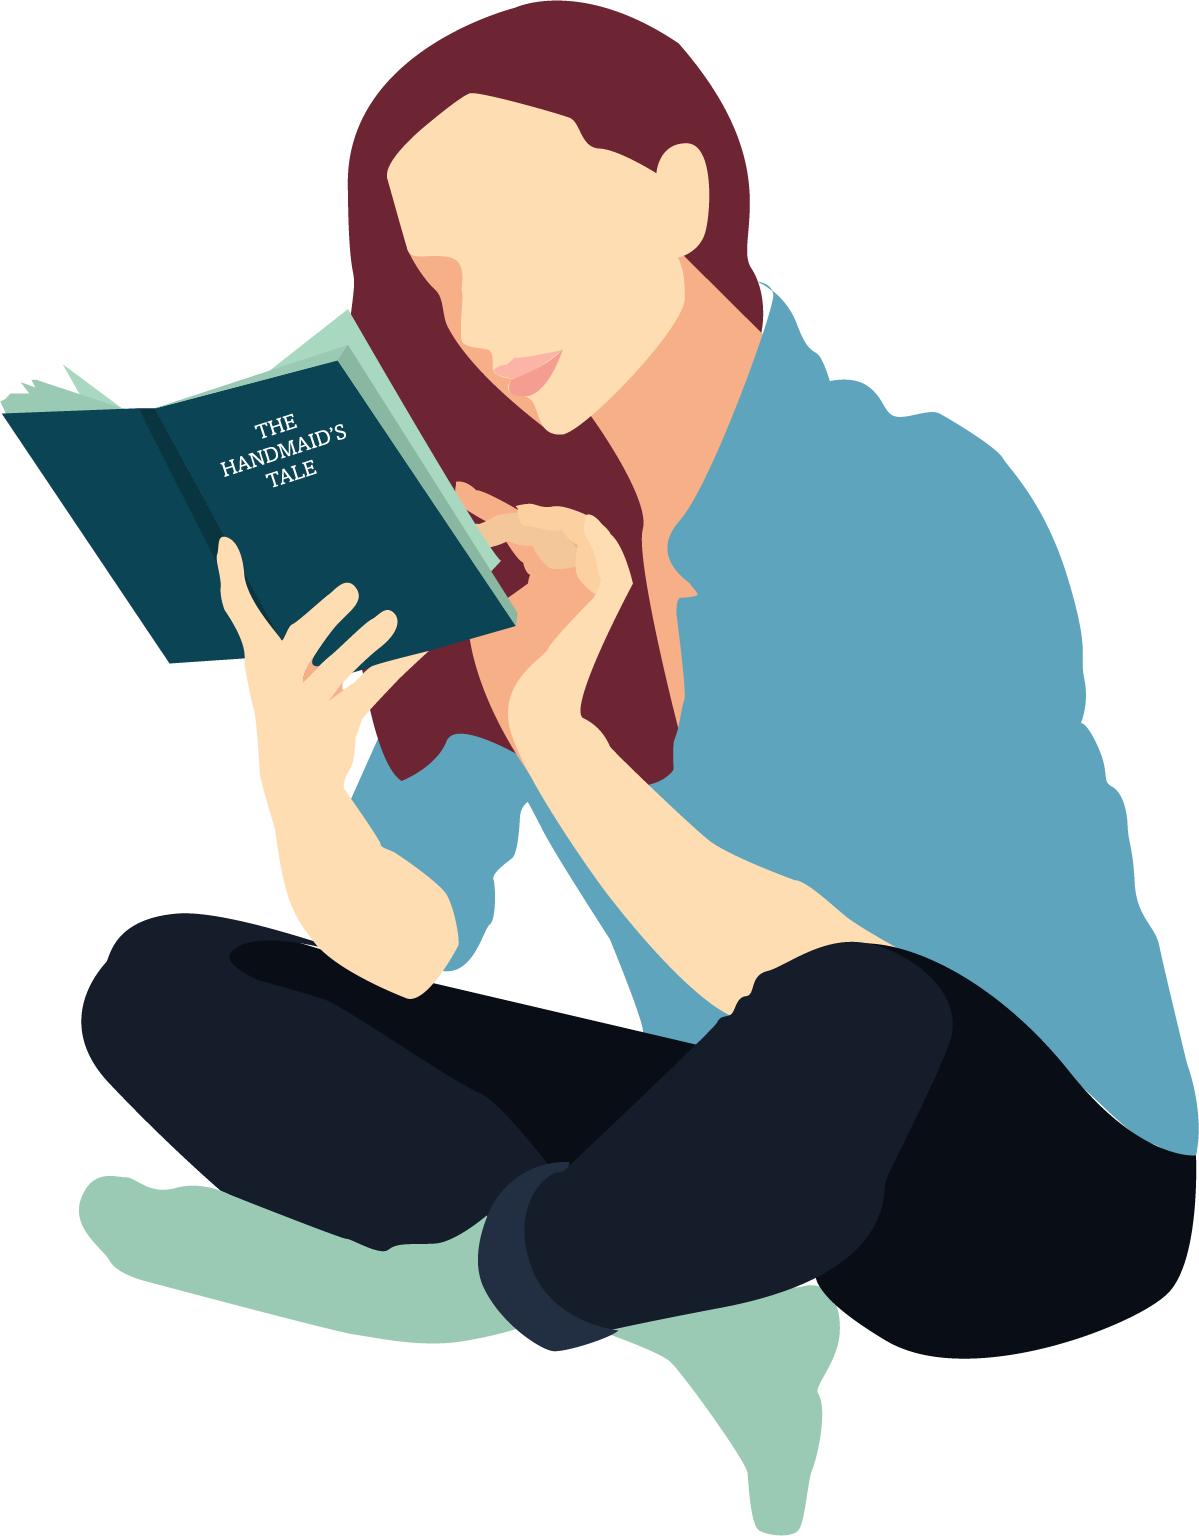 Woman Reading Handmaids Tale Illustration PNG image